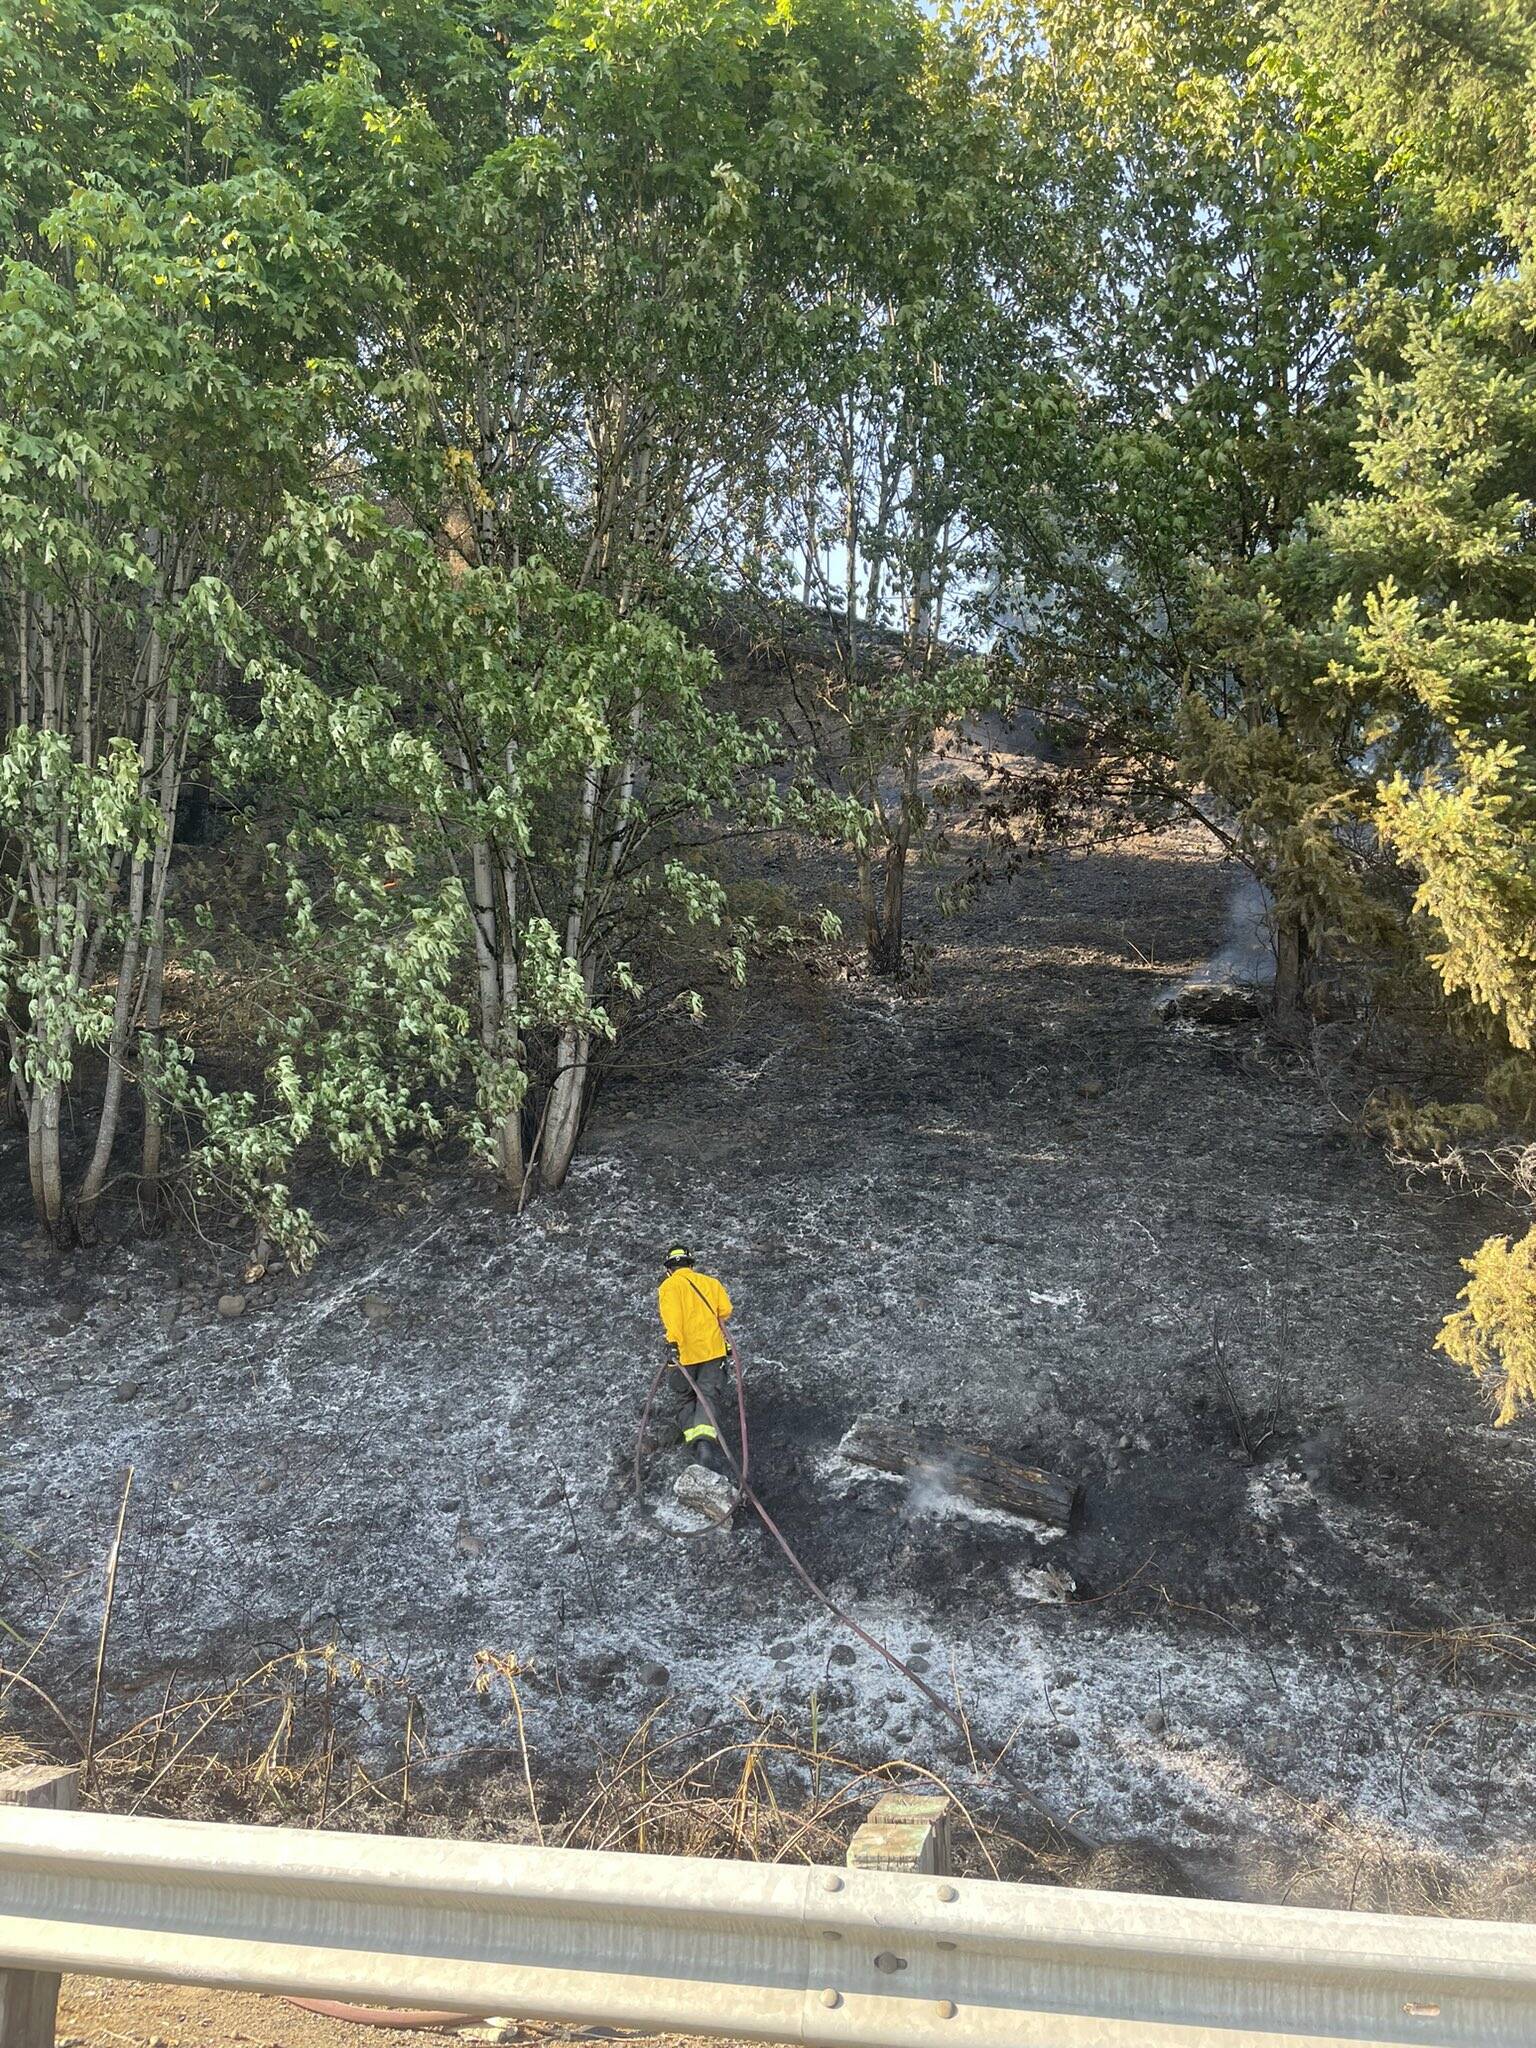 Crews stayed on site for several hours to find and extinguish hot spots and prevent flare ups. (Courtesy of the Renton Regional Fire Authority.)